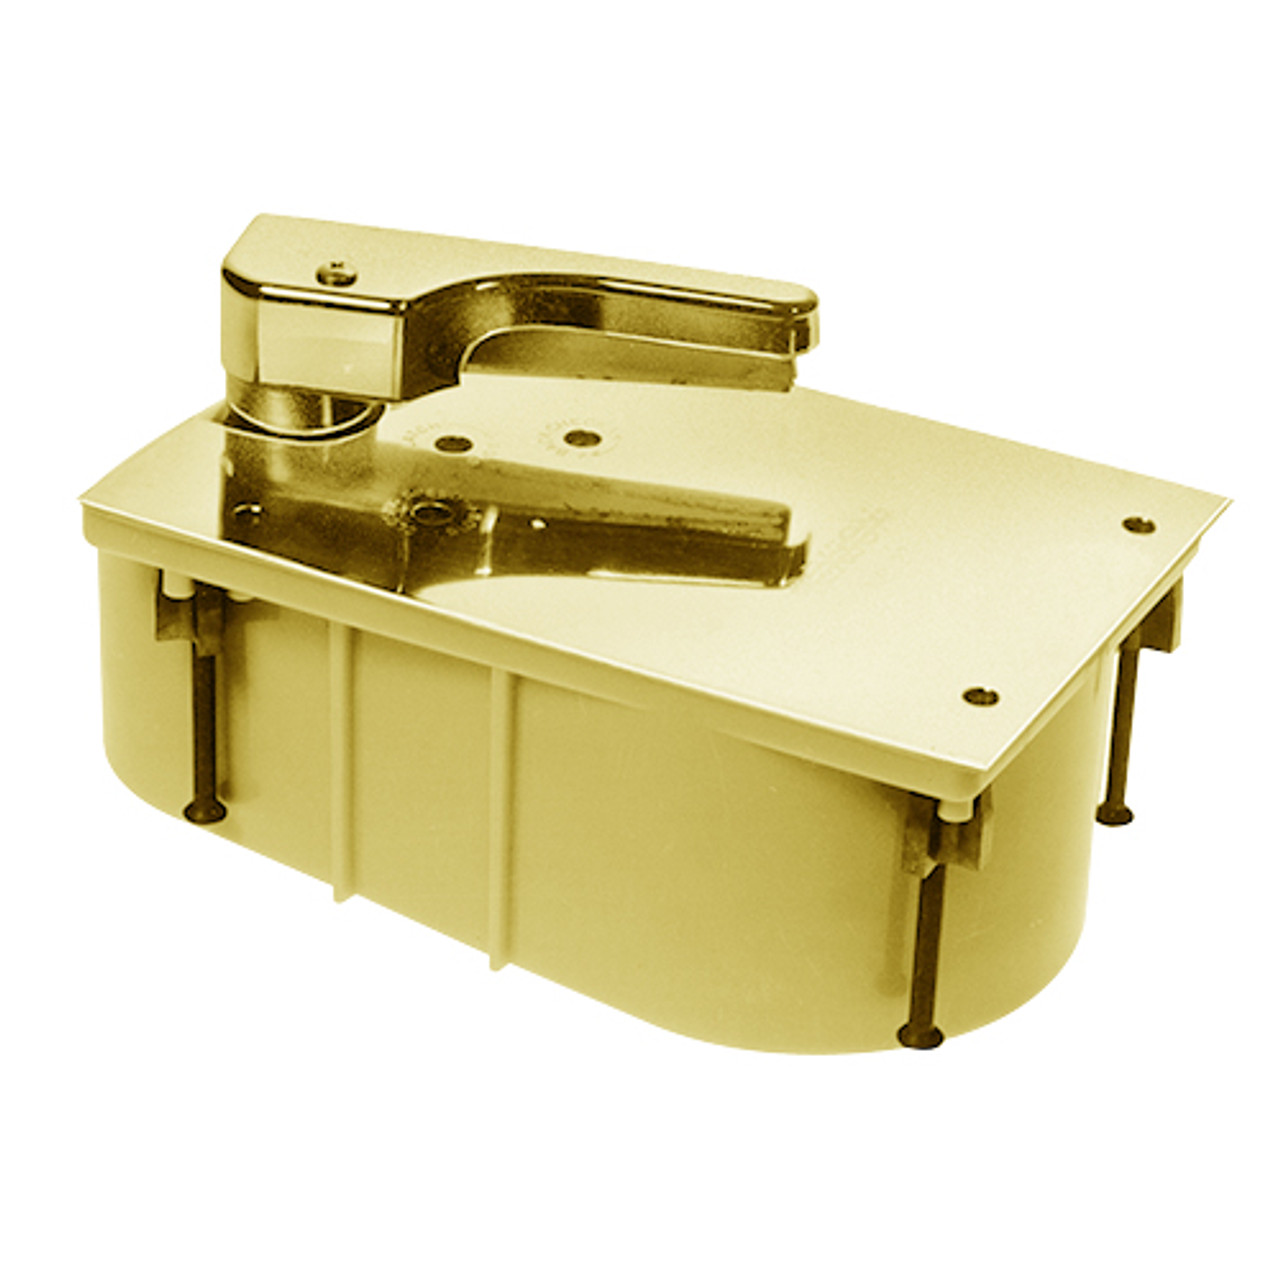 SCHM27-85N-LH-605 Rixson 27 Series Heavy Duty Offset Hung Floor Closer with HM Door and Frame Preps in Bright Brass Finish